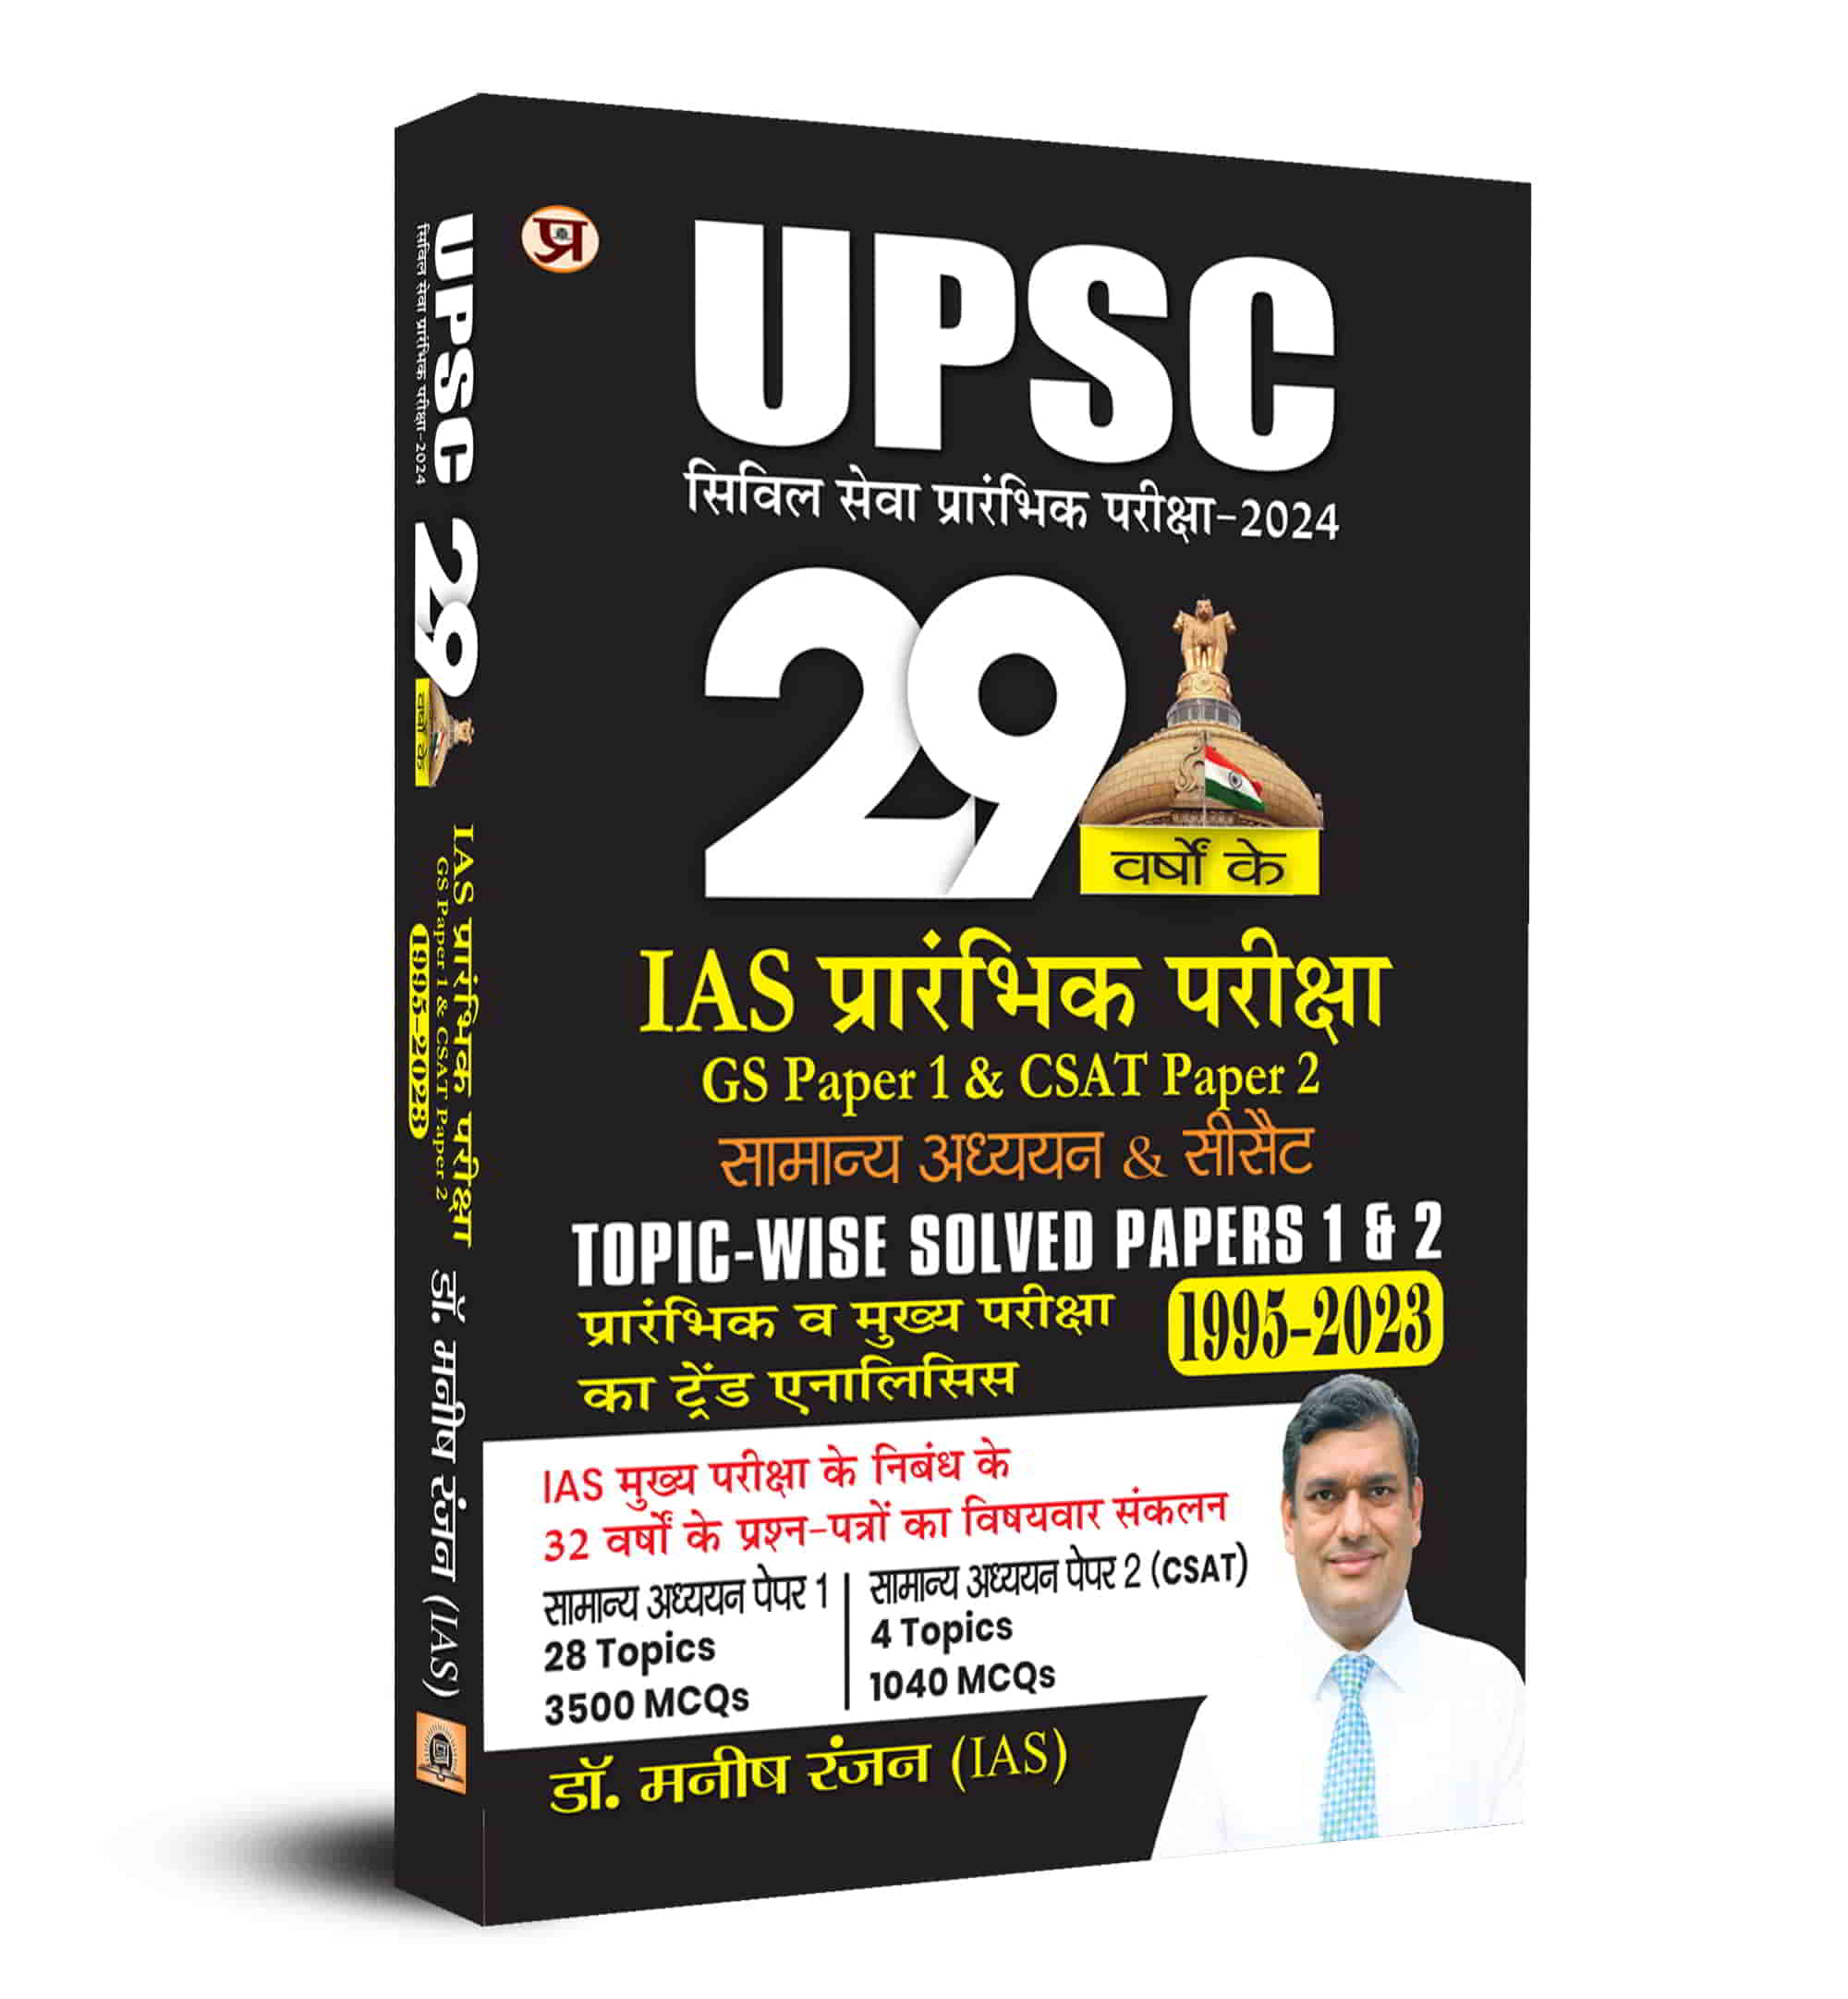 UPSC 29 Years Civil Services IAS Prelims Topic-wise Solved Papers 1 an...